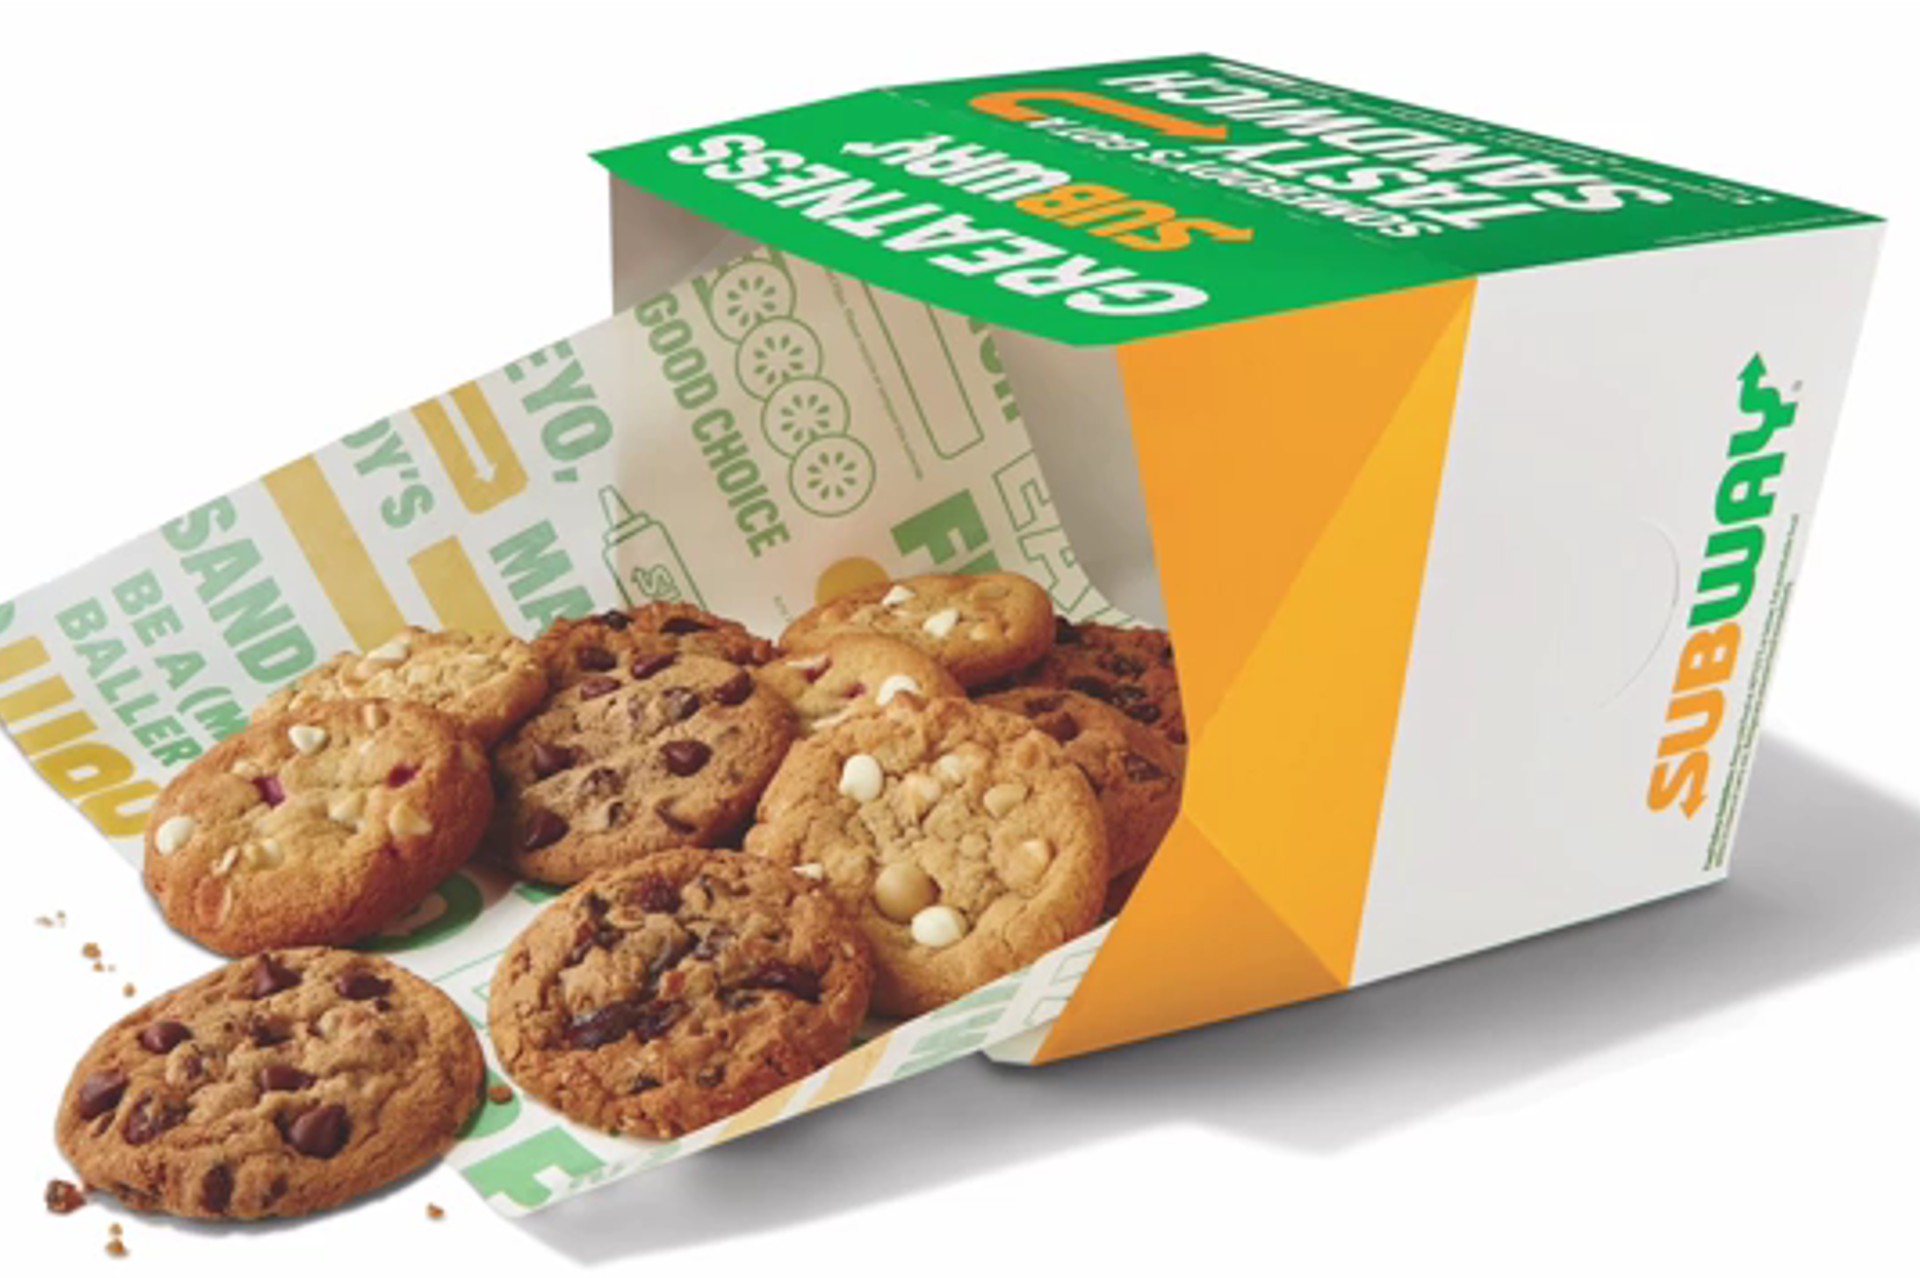 Subway Unveils the World's First Footlong Cookie Only Available